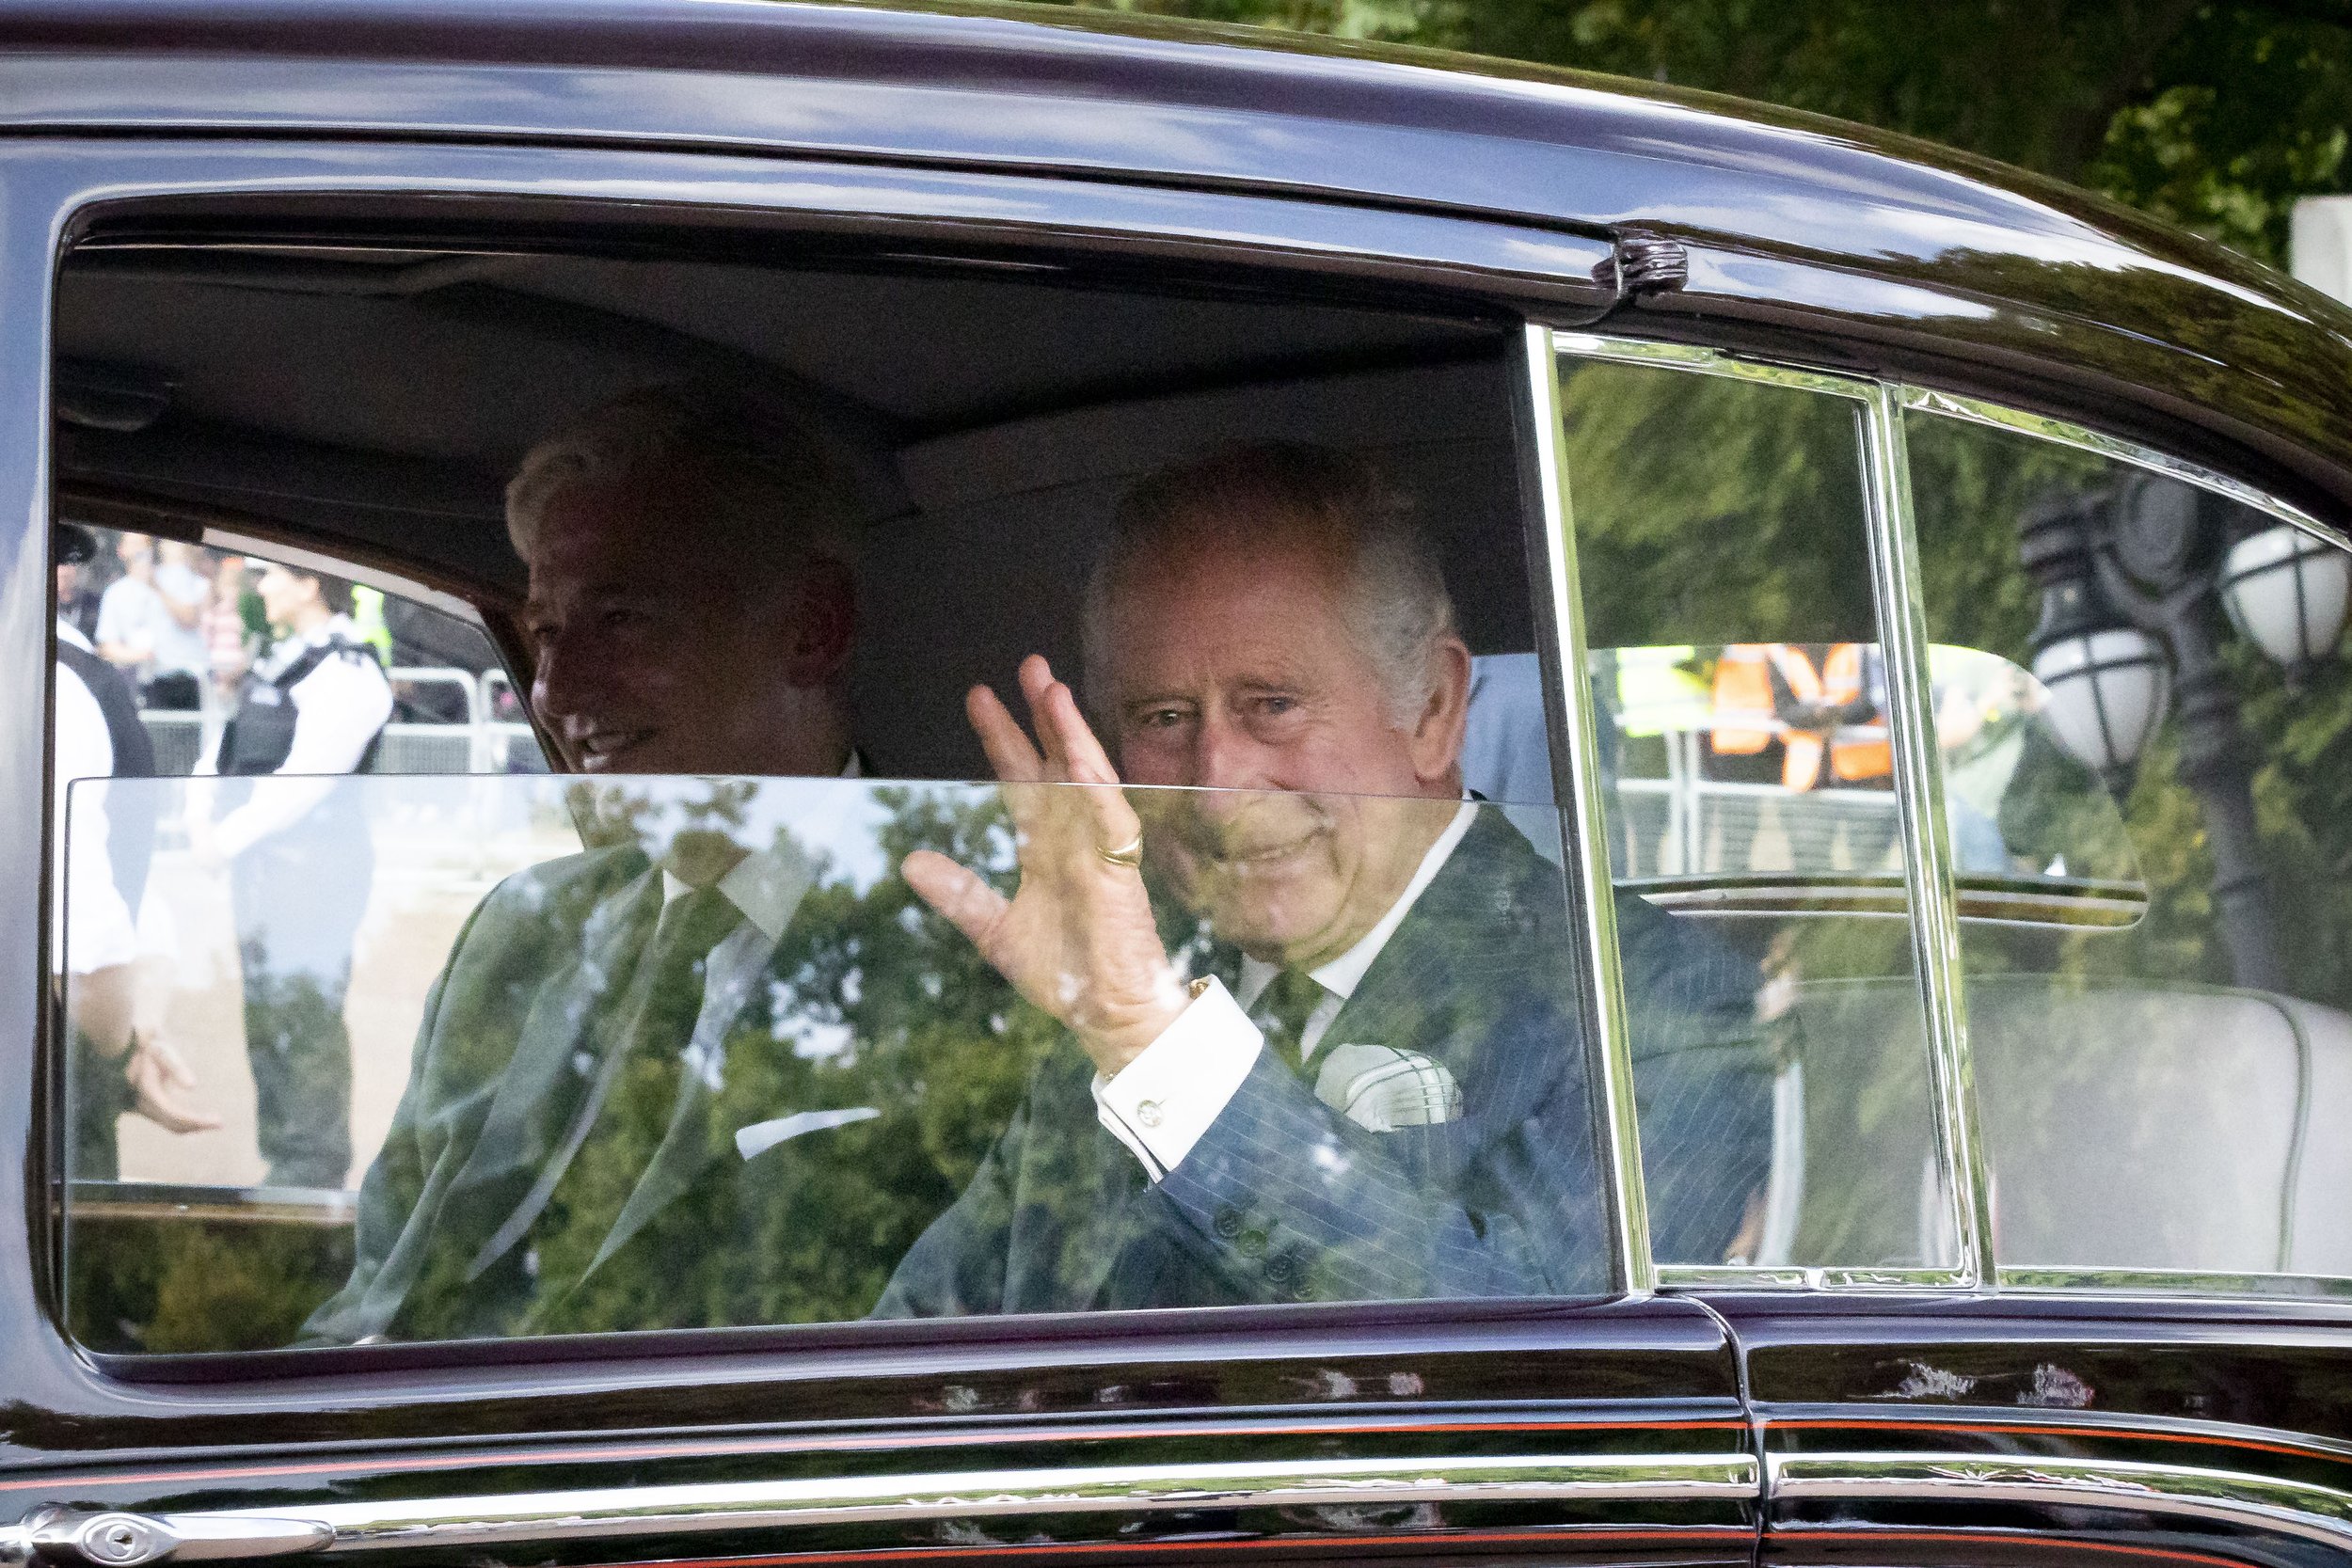  King Charles III waves to fans as he returns to Buckingham Palace ahead of meeting political leaders - Sept 2022.  